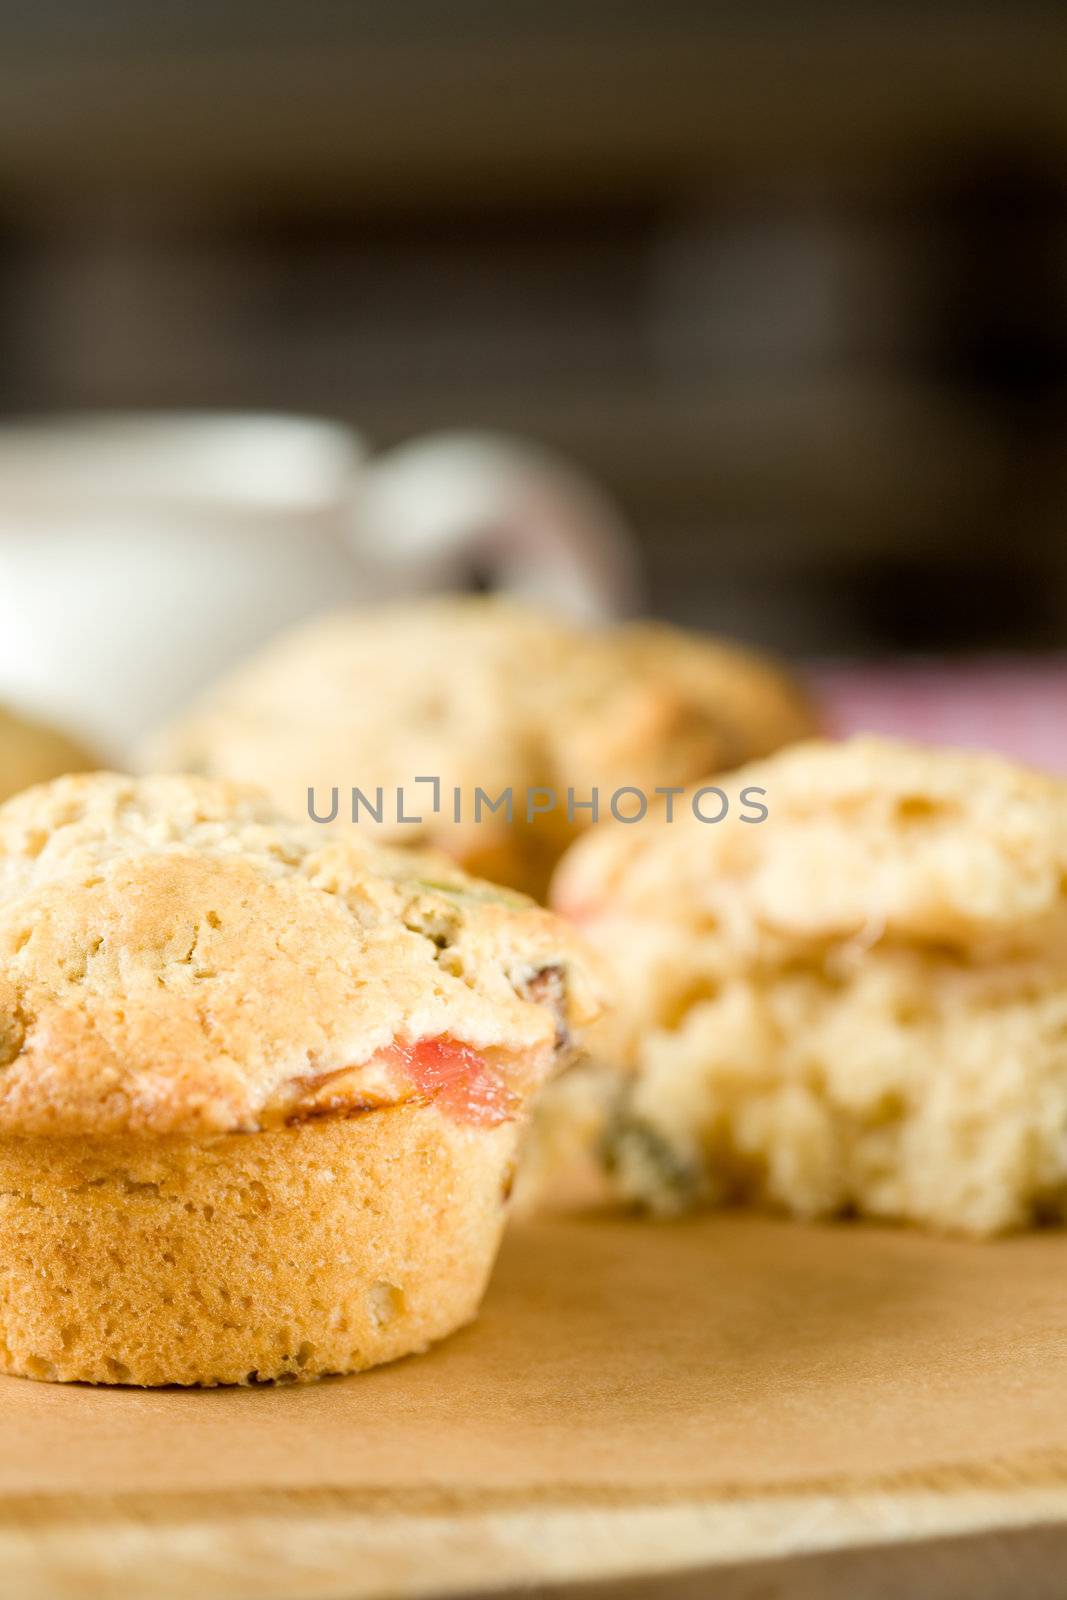 Rhubarb and pistachio muffin by Fotosmurf